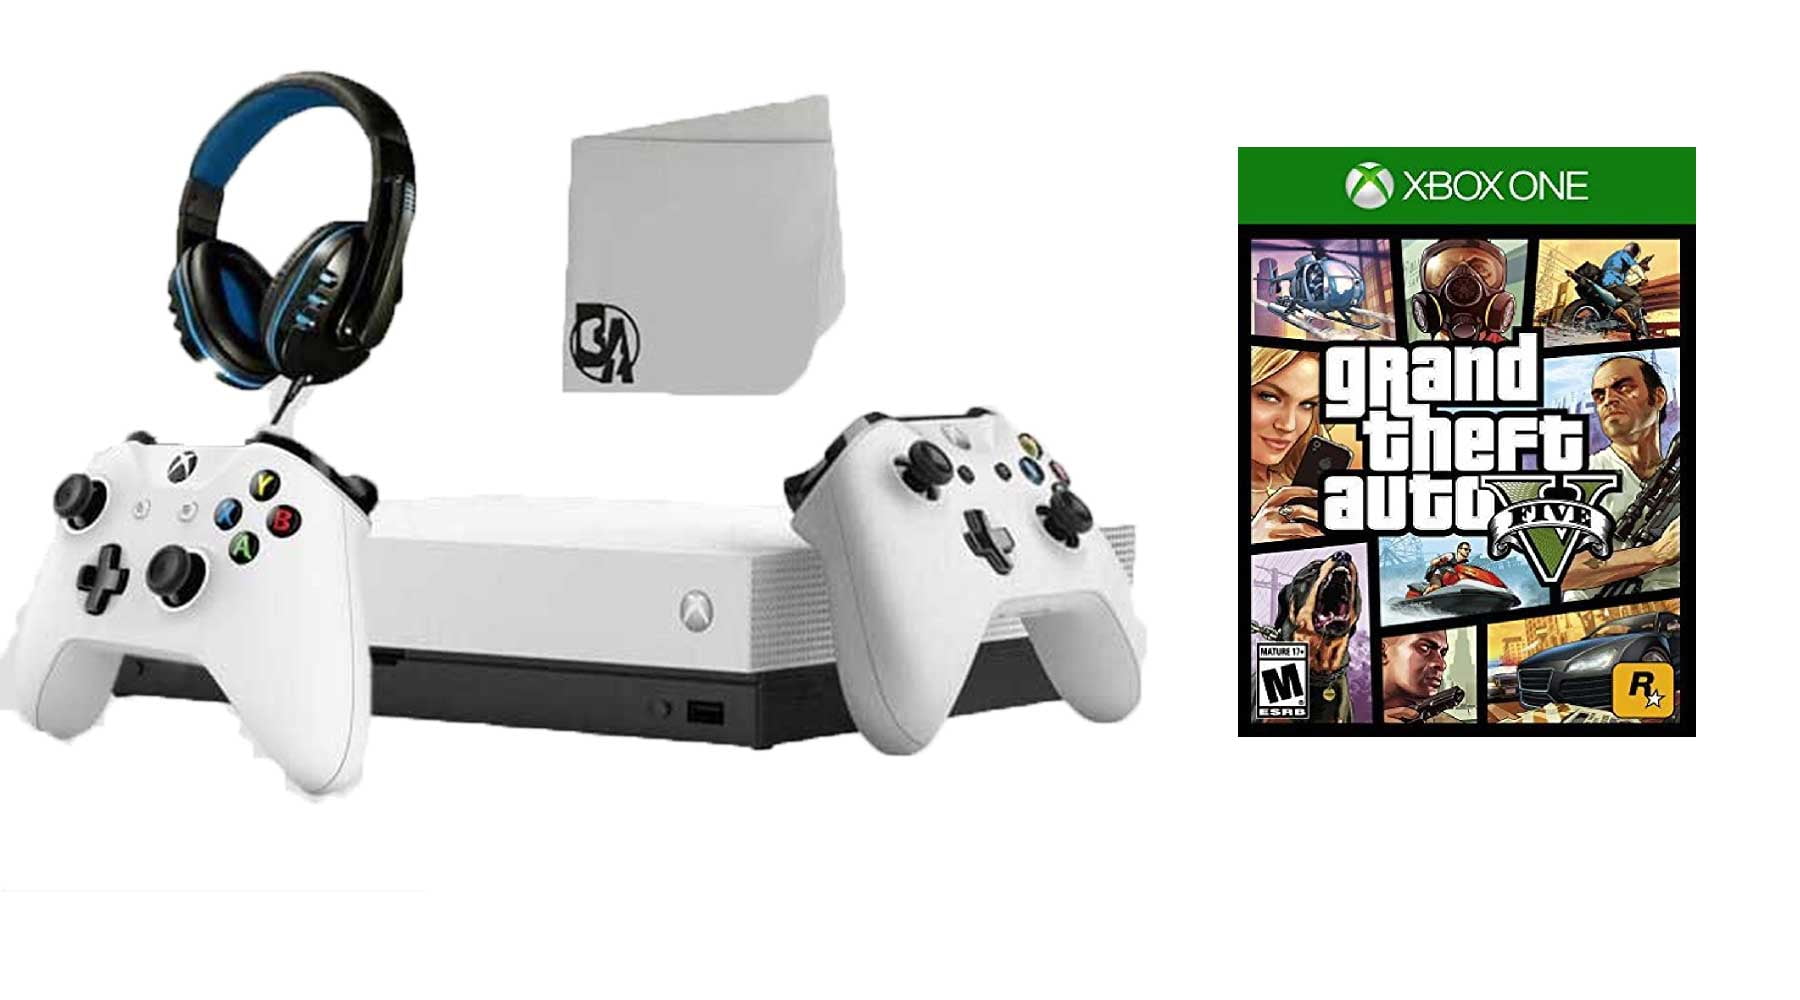 Games/Apps: GTA V from $24, Two EA Sports titles for $70, Dual Xbox One  controller charger $30, freebies, more